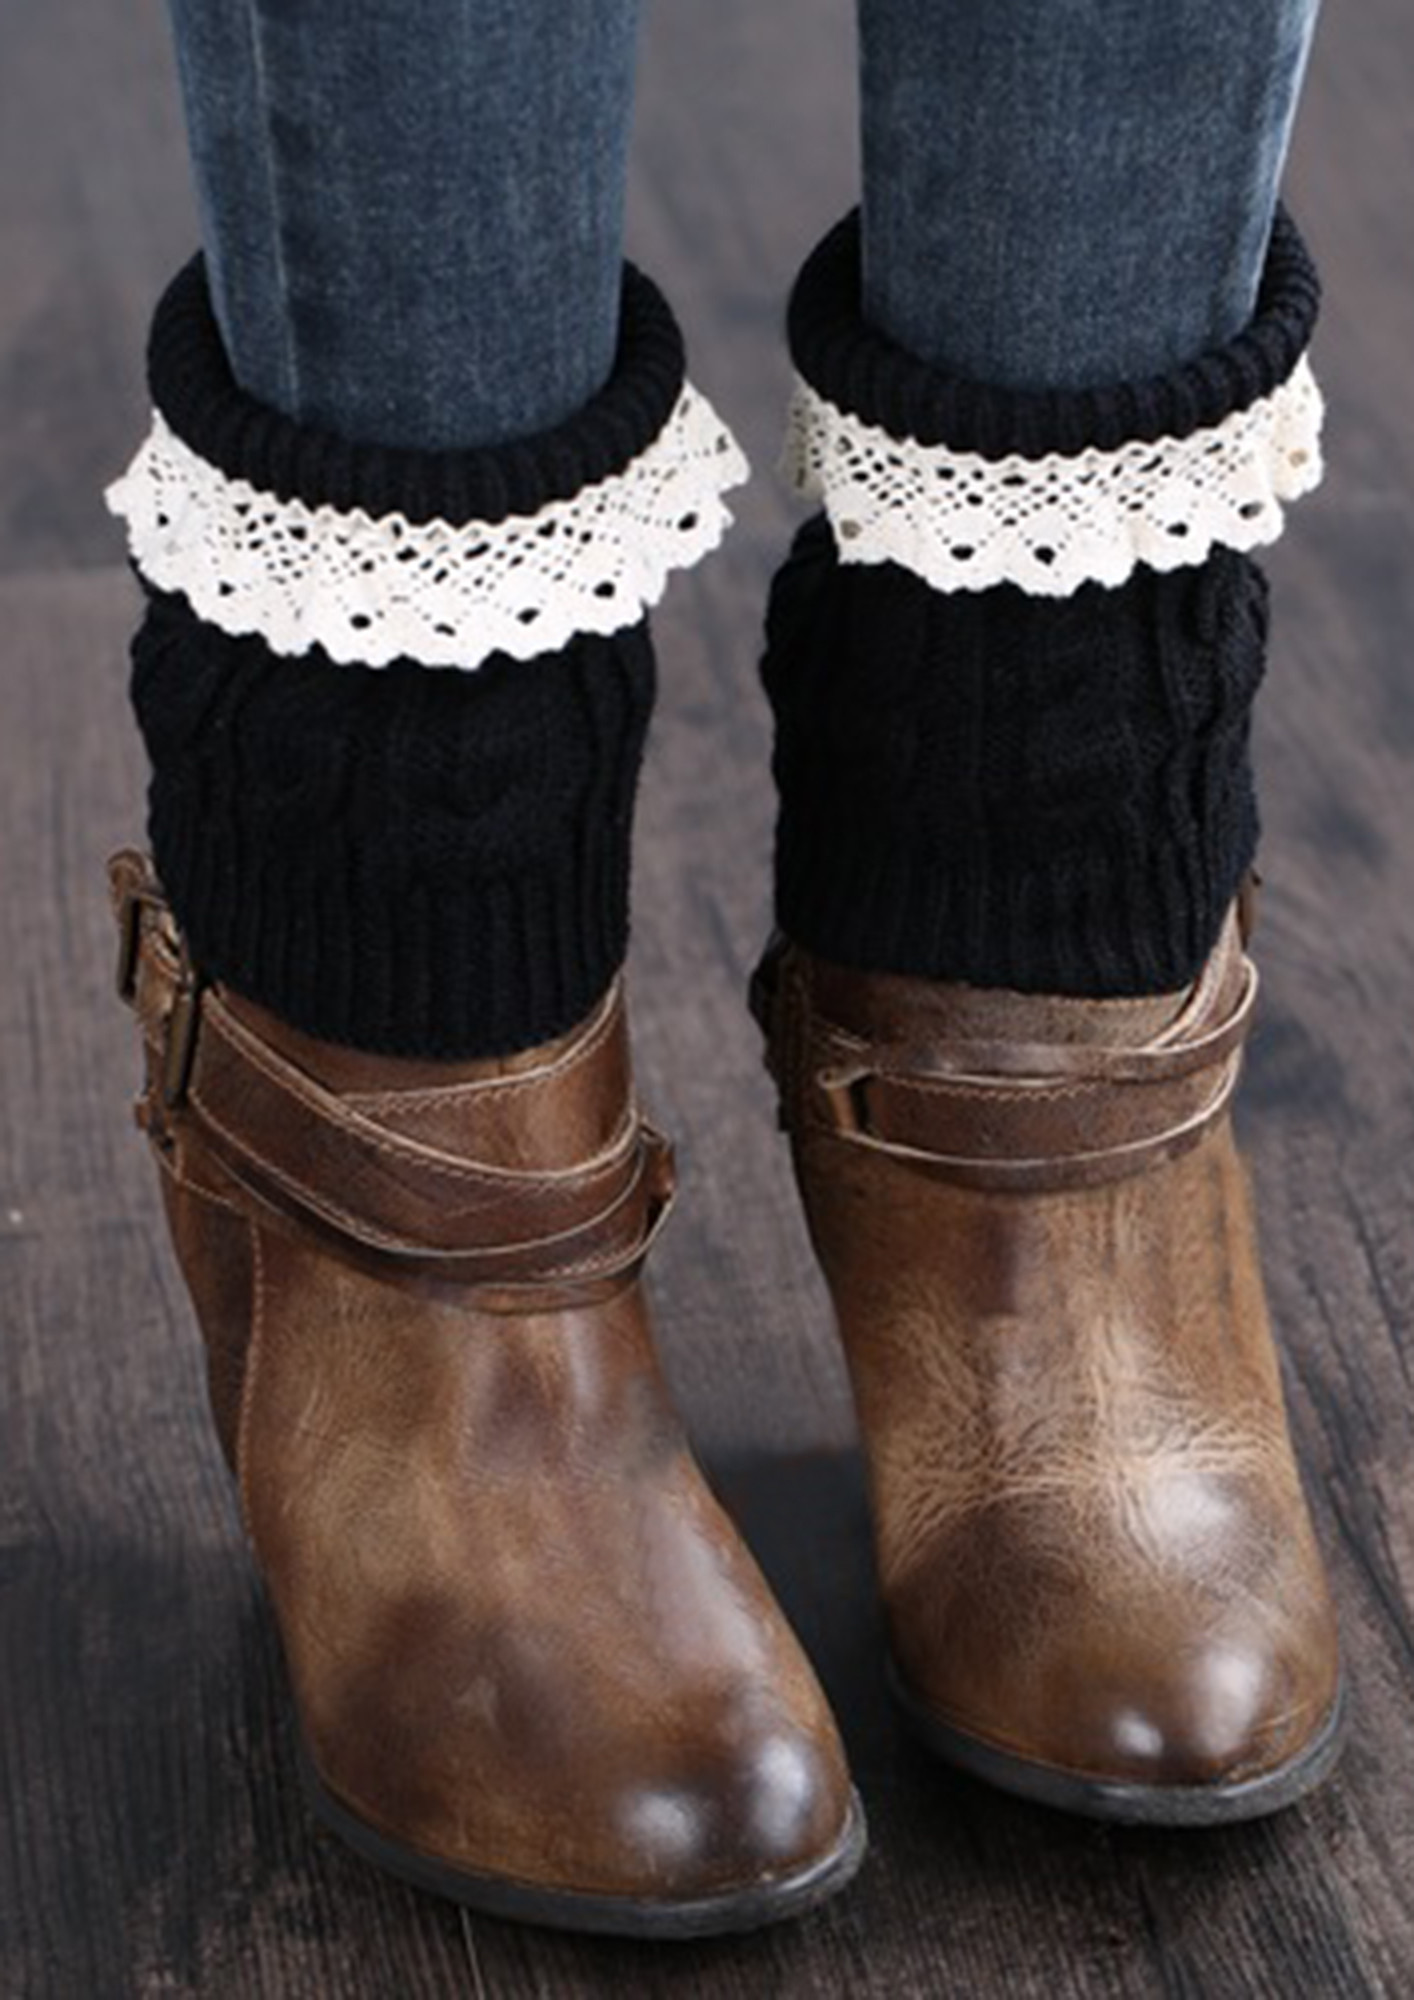 LACE TRIM & RIBBED ACRYLIC BLACK BOOT CUFFS